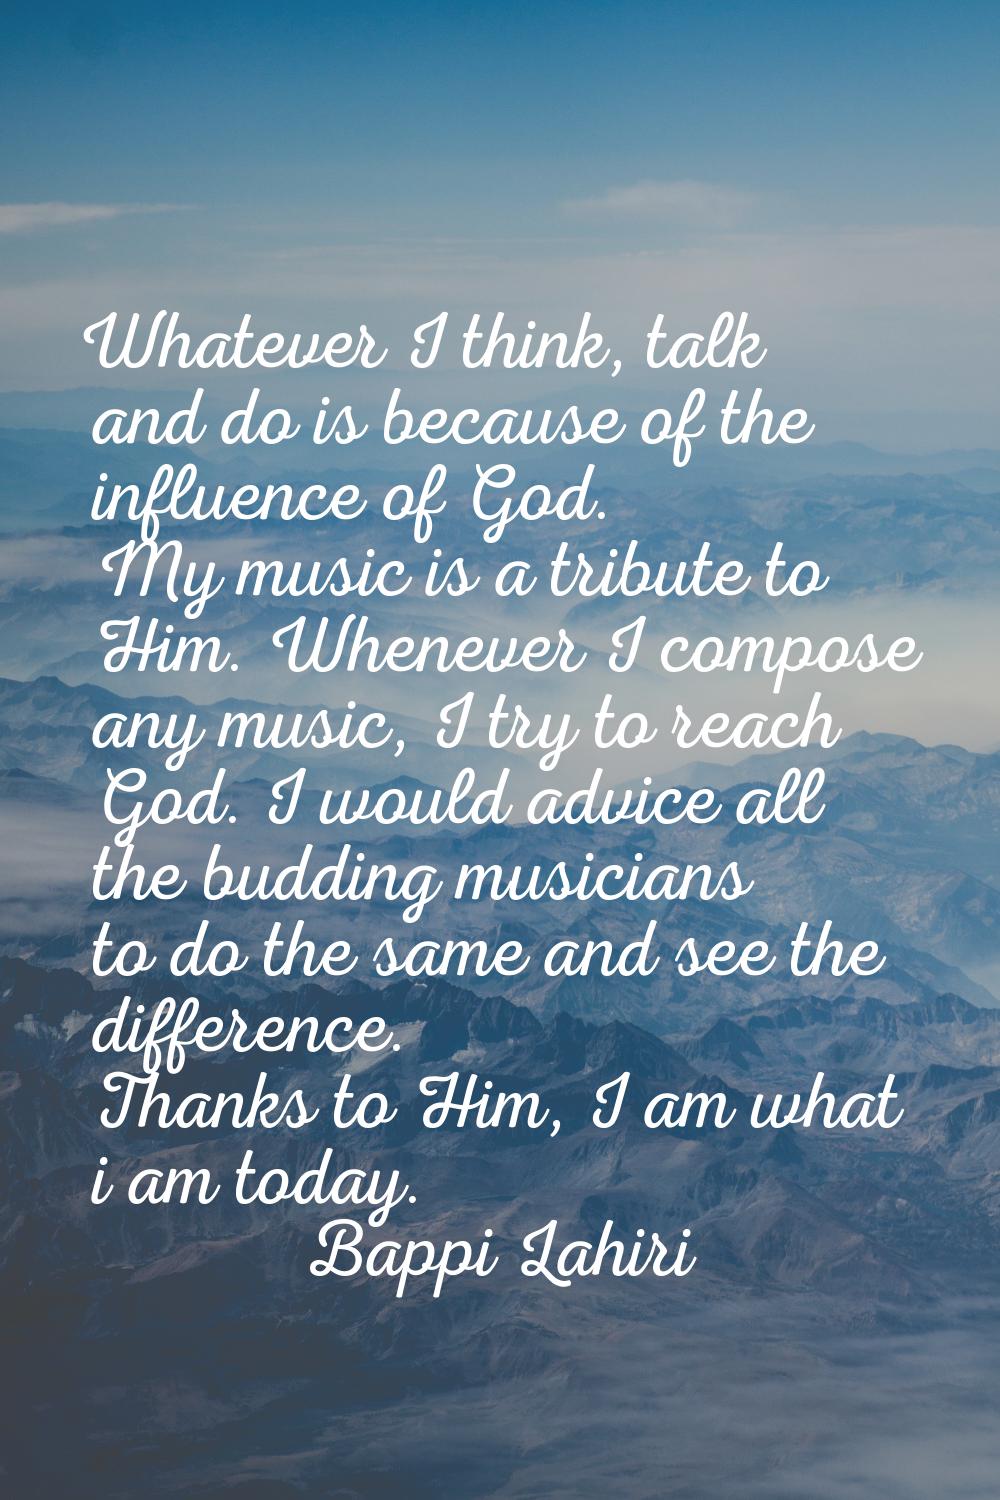 Whatever I think, talk and do is because of the influence of God. My music is a tribute to Him. Whe